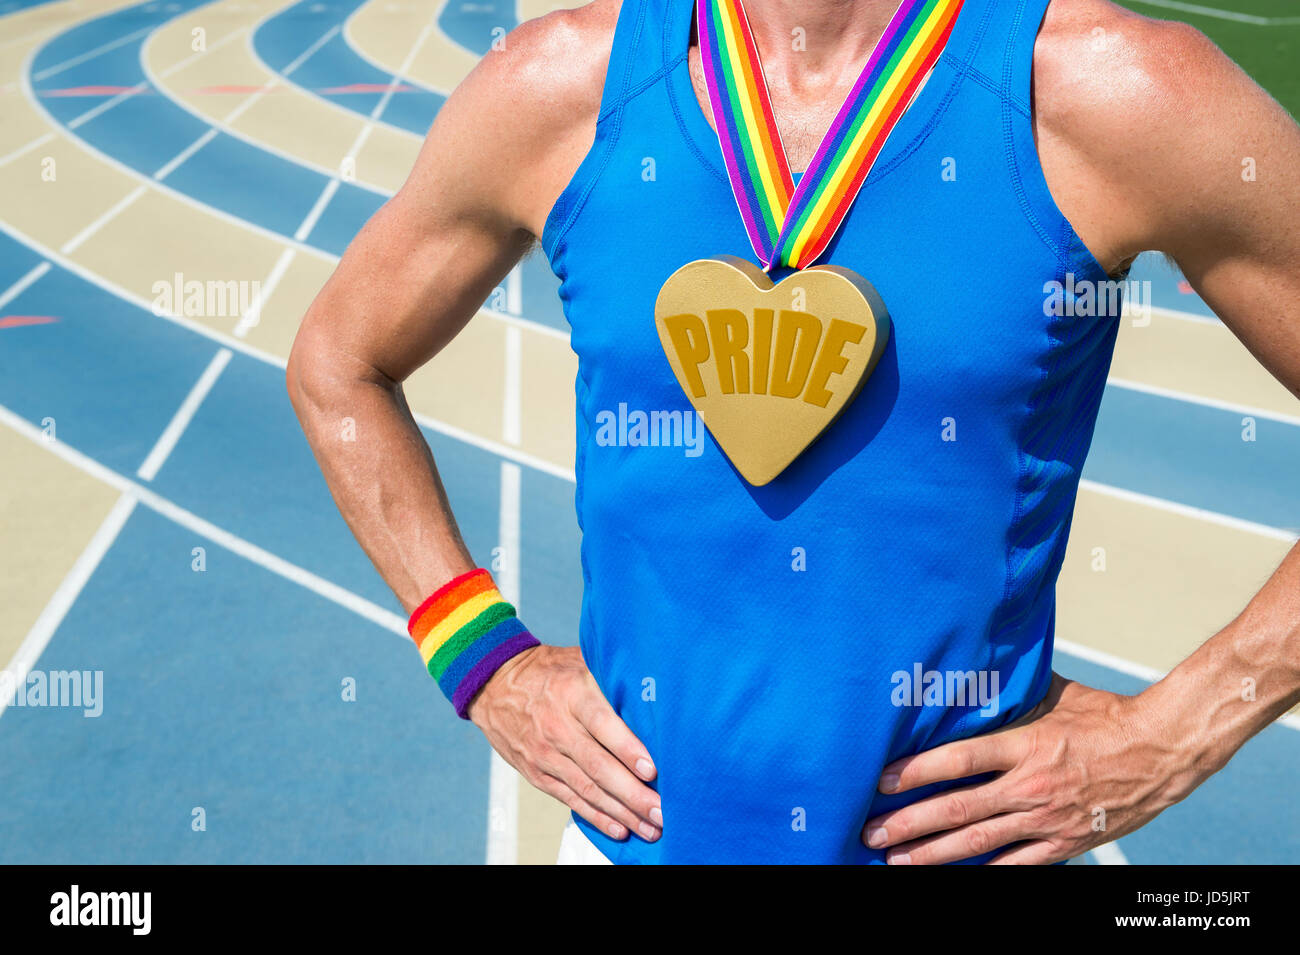 Athlete standing with large 'pride' gold heart medal and rainbow ribbons and sweat band  at a running track Stock Photo